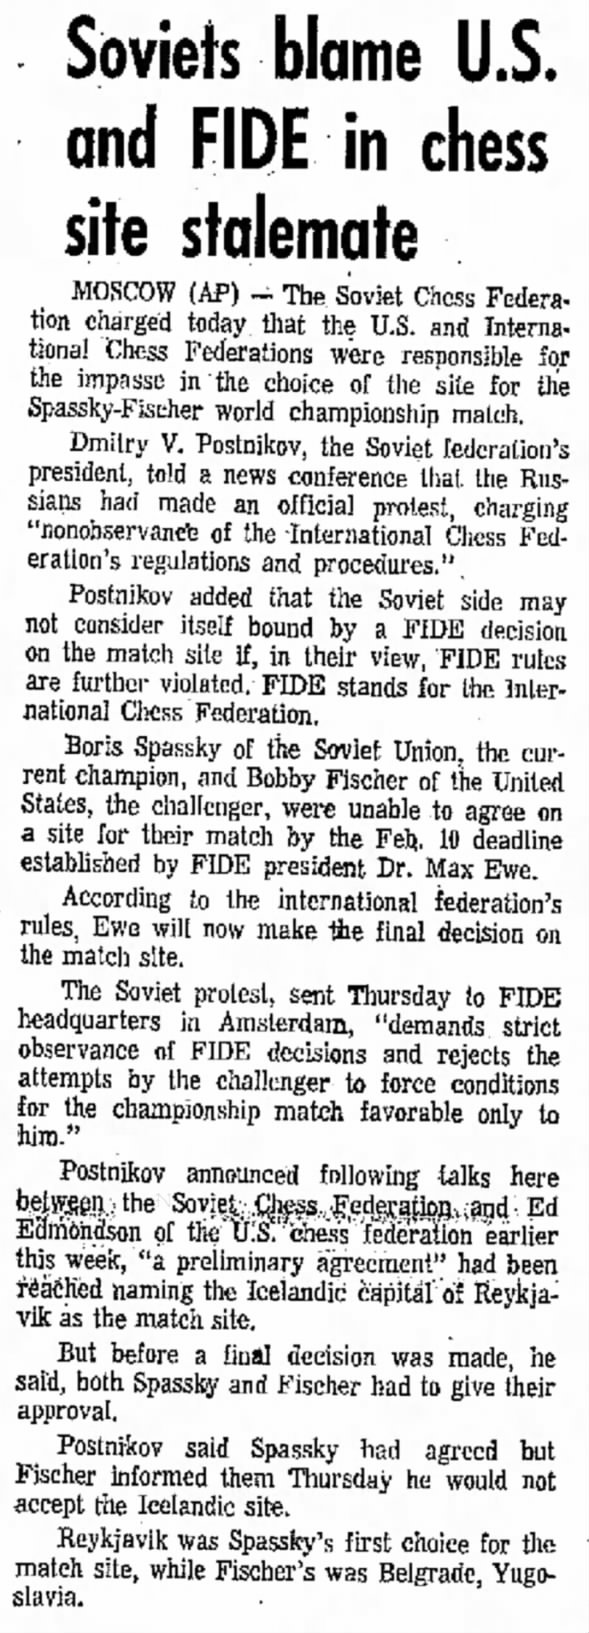 Soviets Blame U.S. and FIDE in Chess Site Stalemate